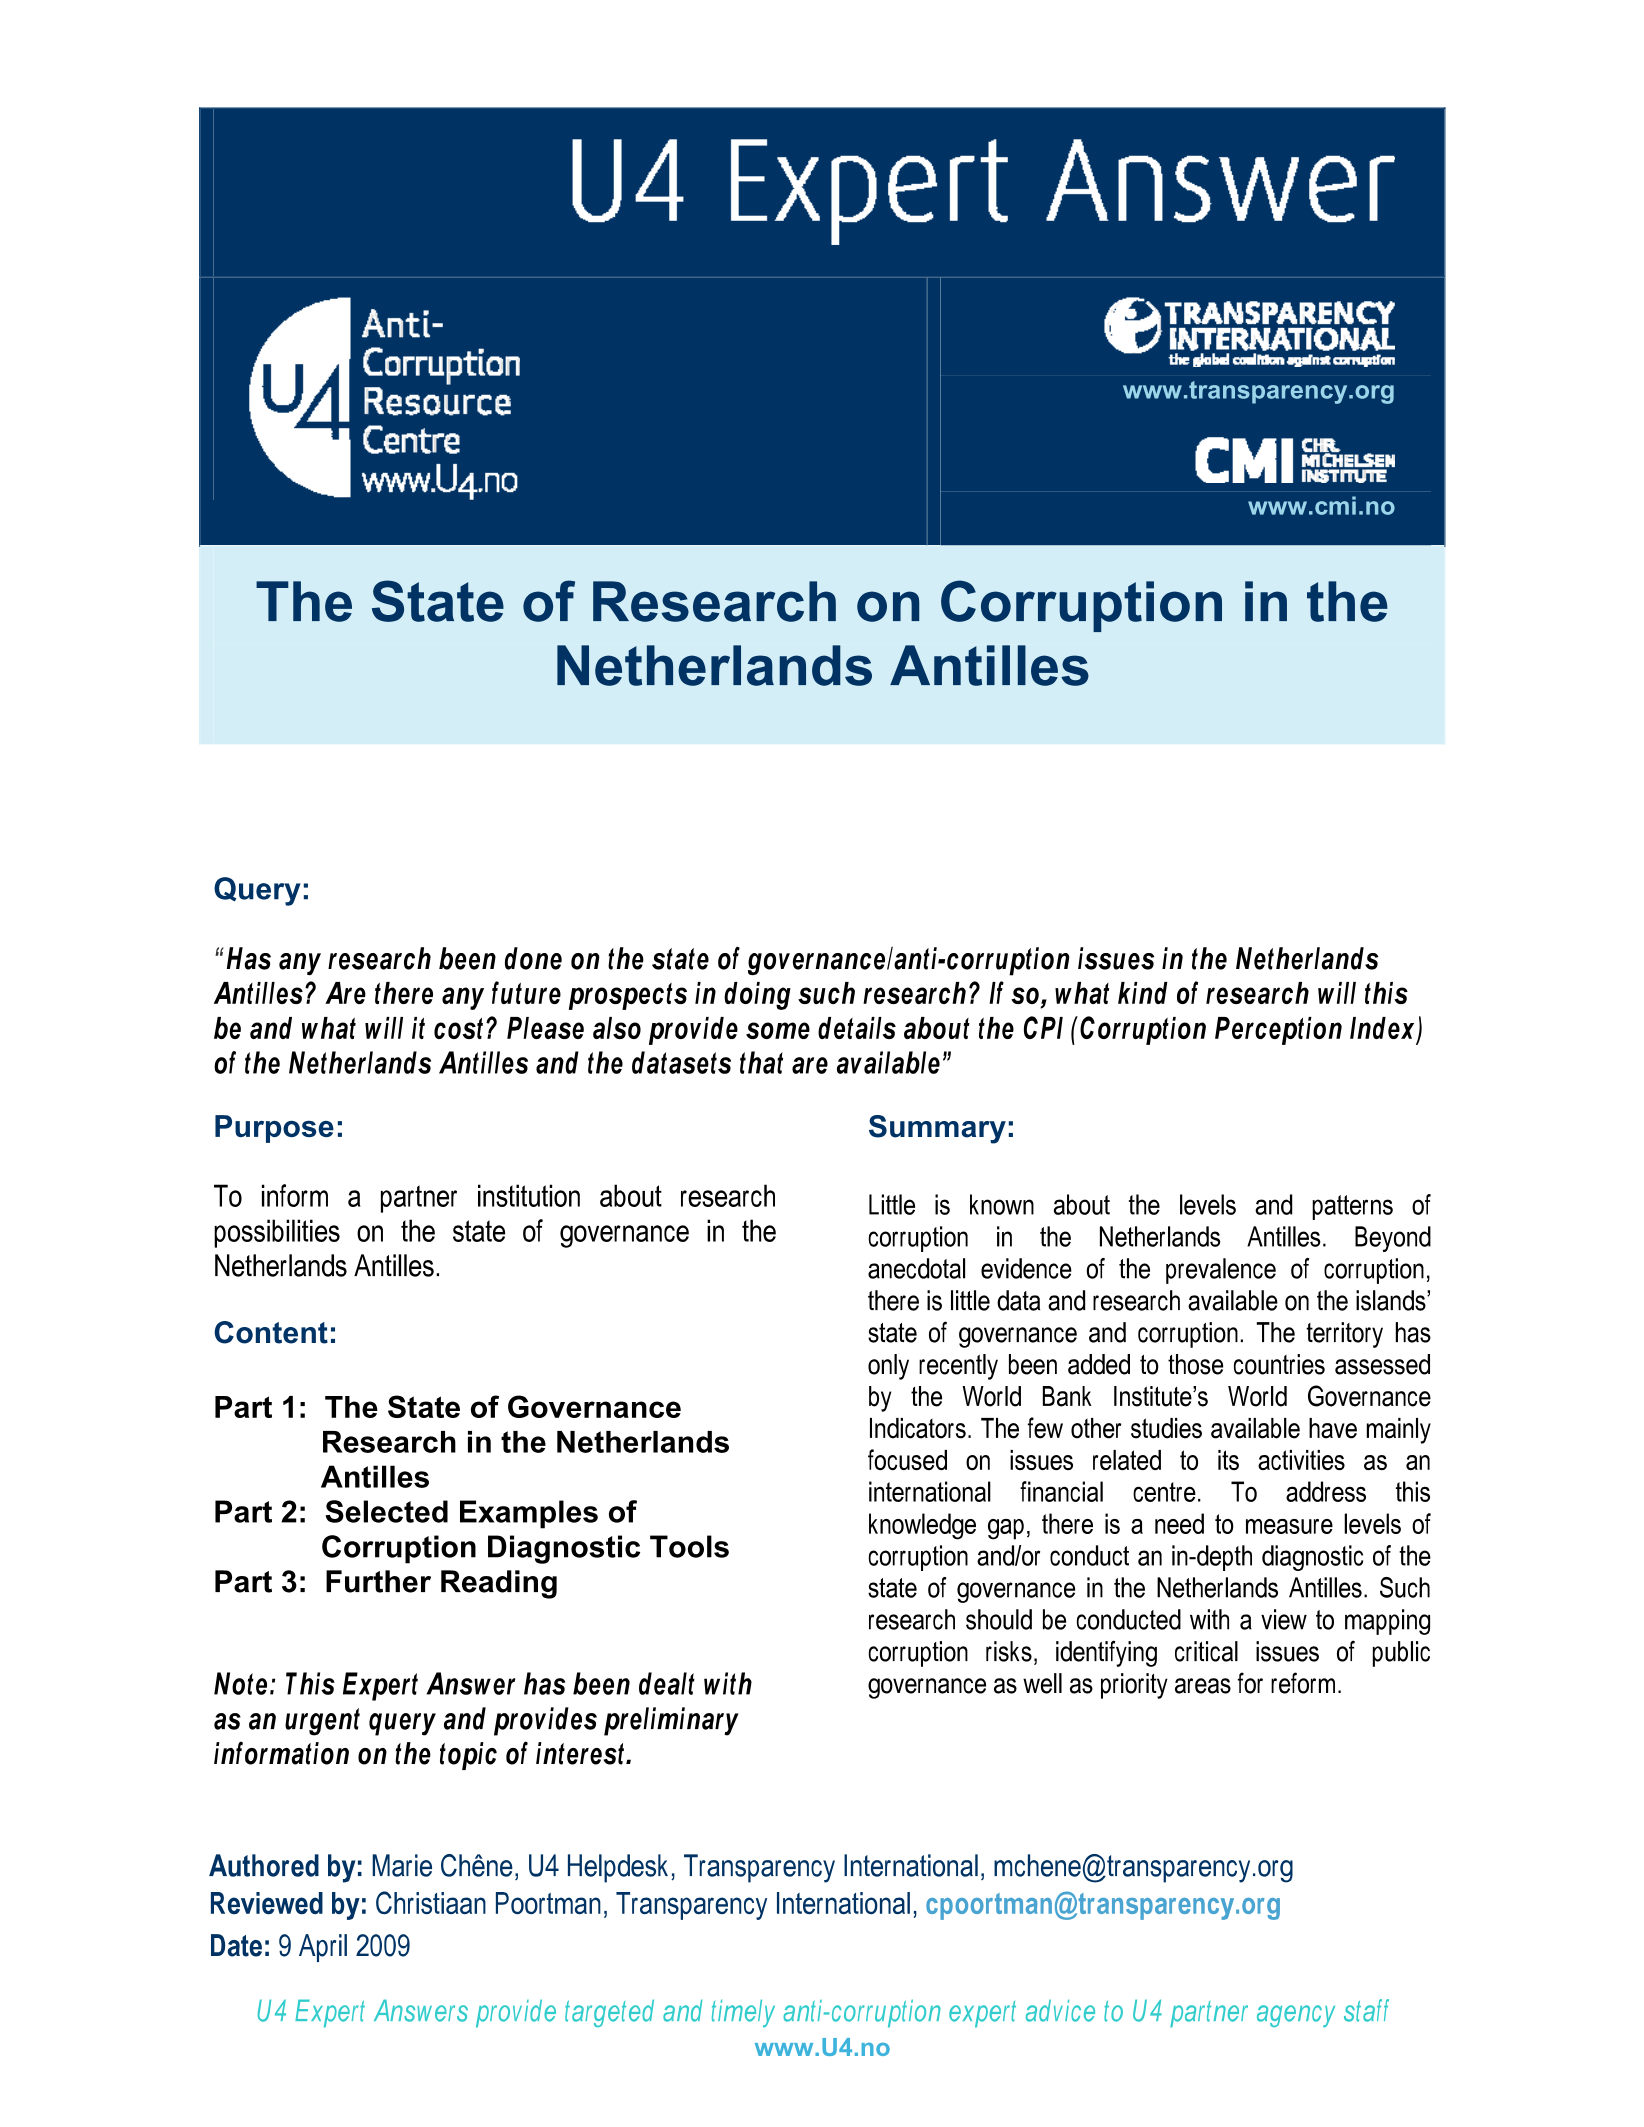 The state of research on corruption in the Netherlands Antilles